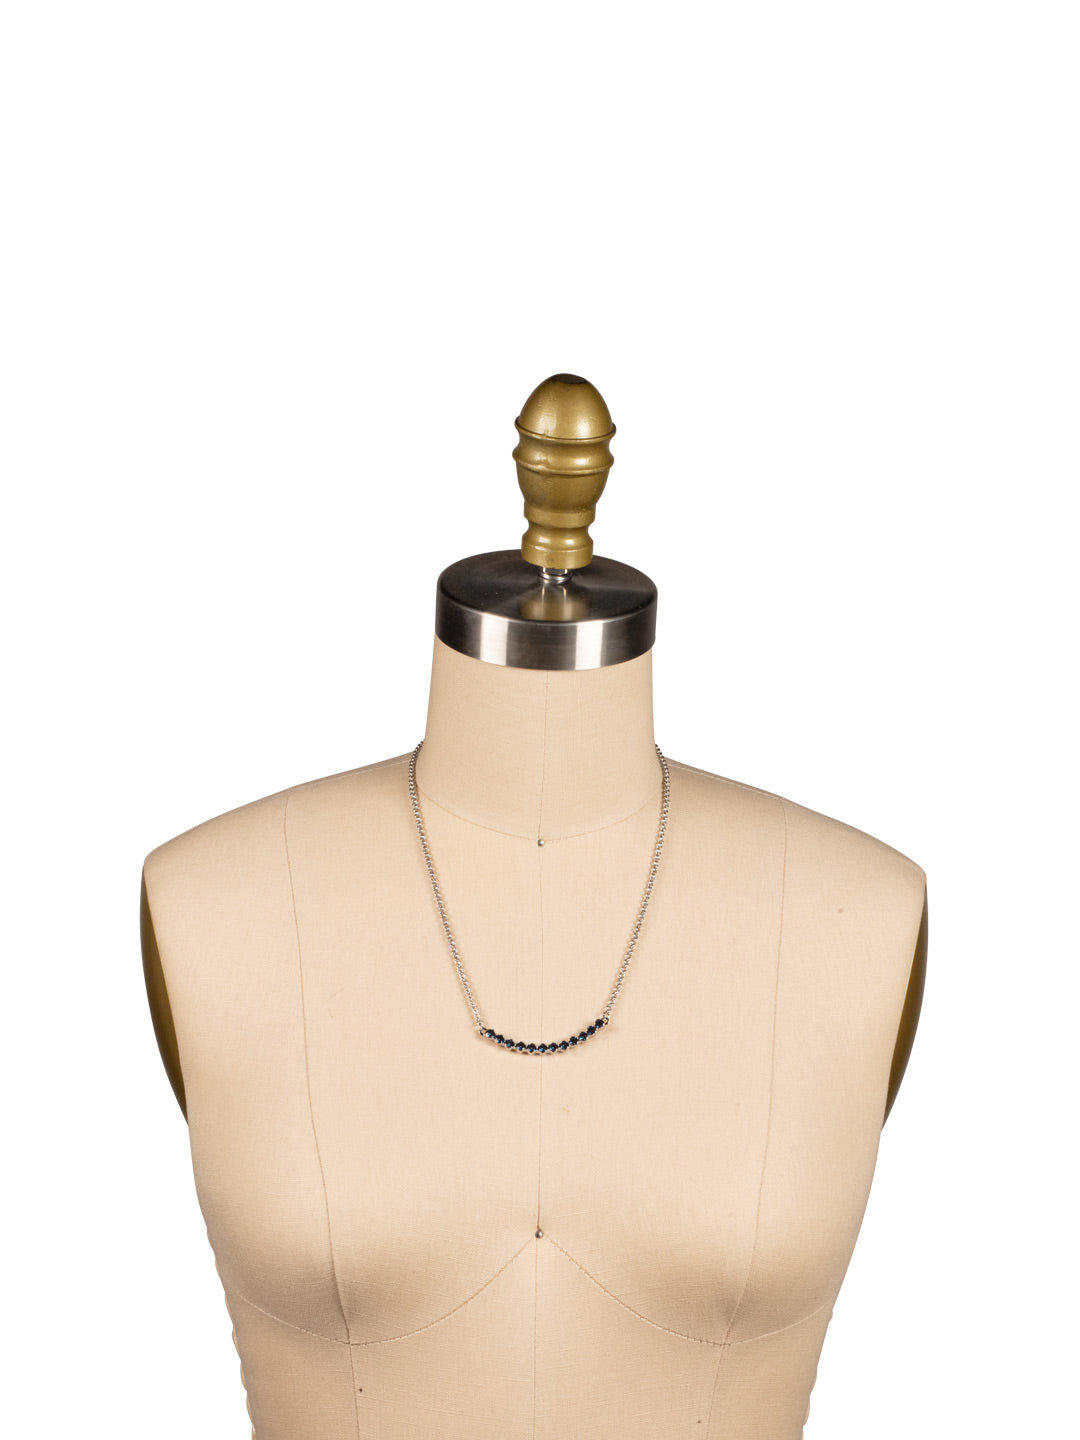 Clarissa Repeating Tennis Necklace - NFL5PDASP